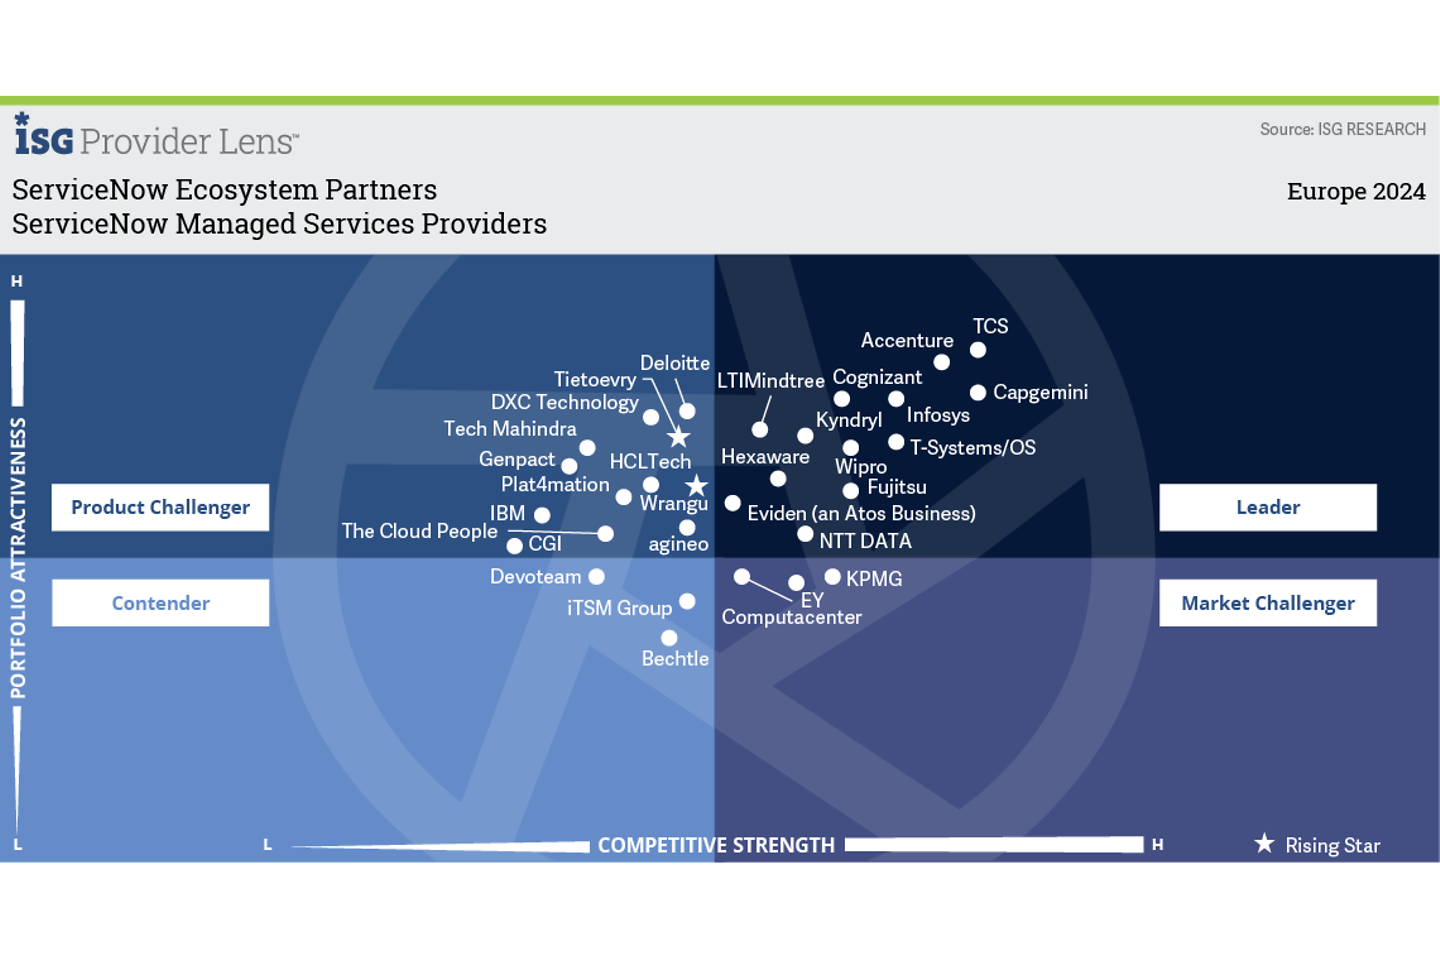 ServiceNow Managed Services Providers